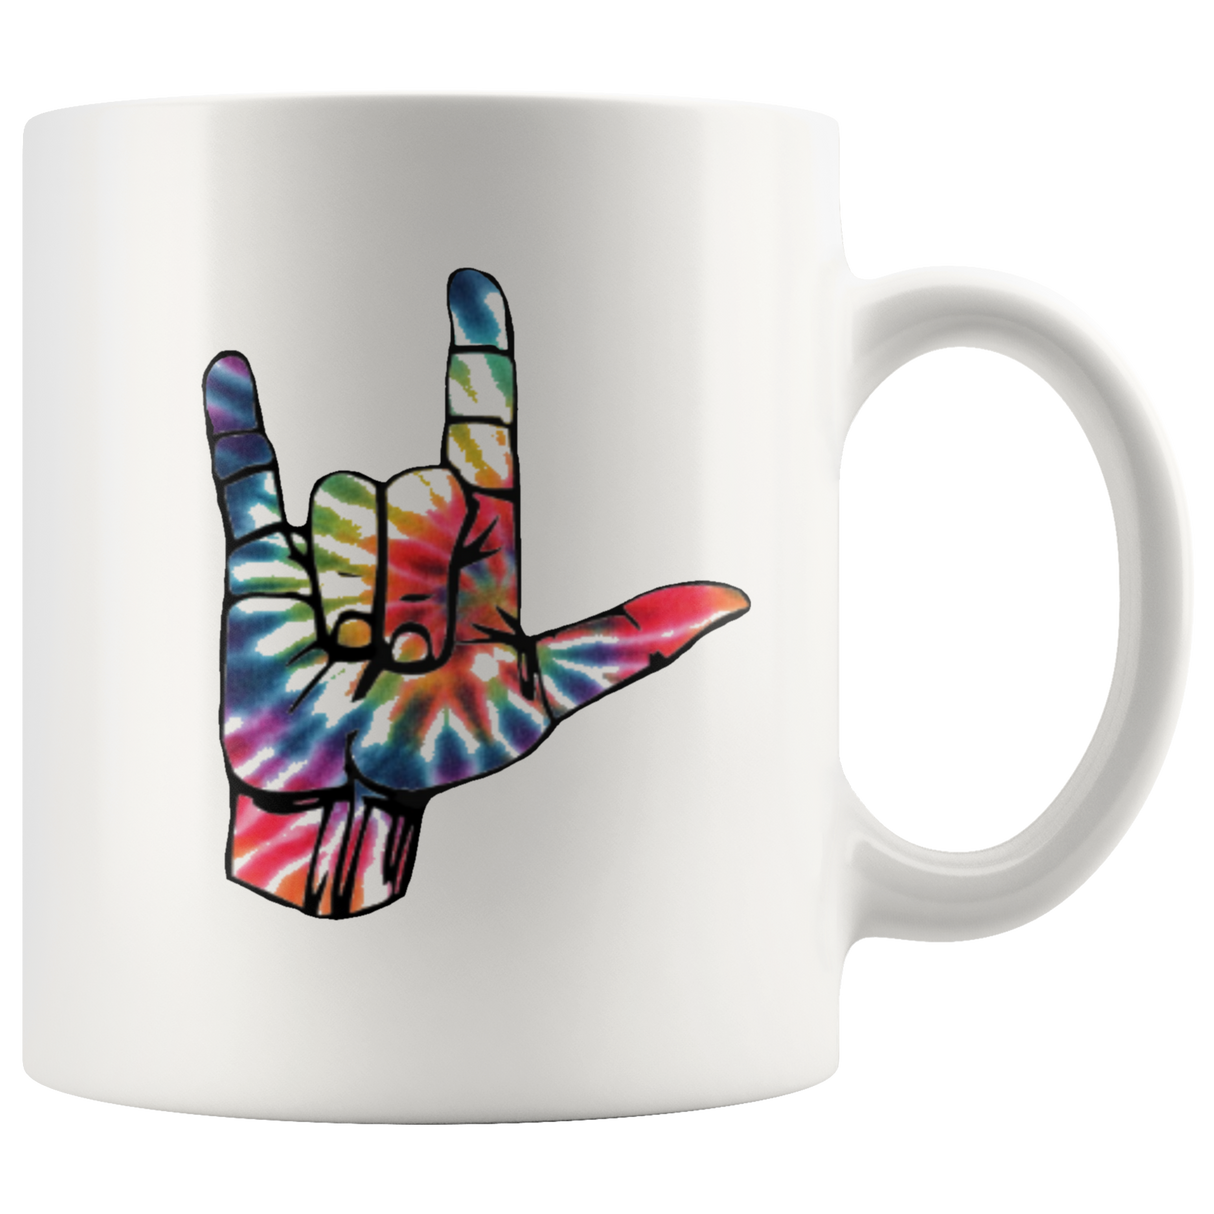 Colorful Hands MUGS - Shop Sassy Chick 